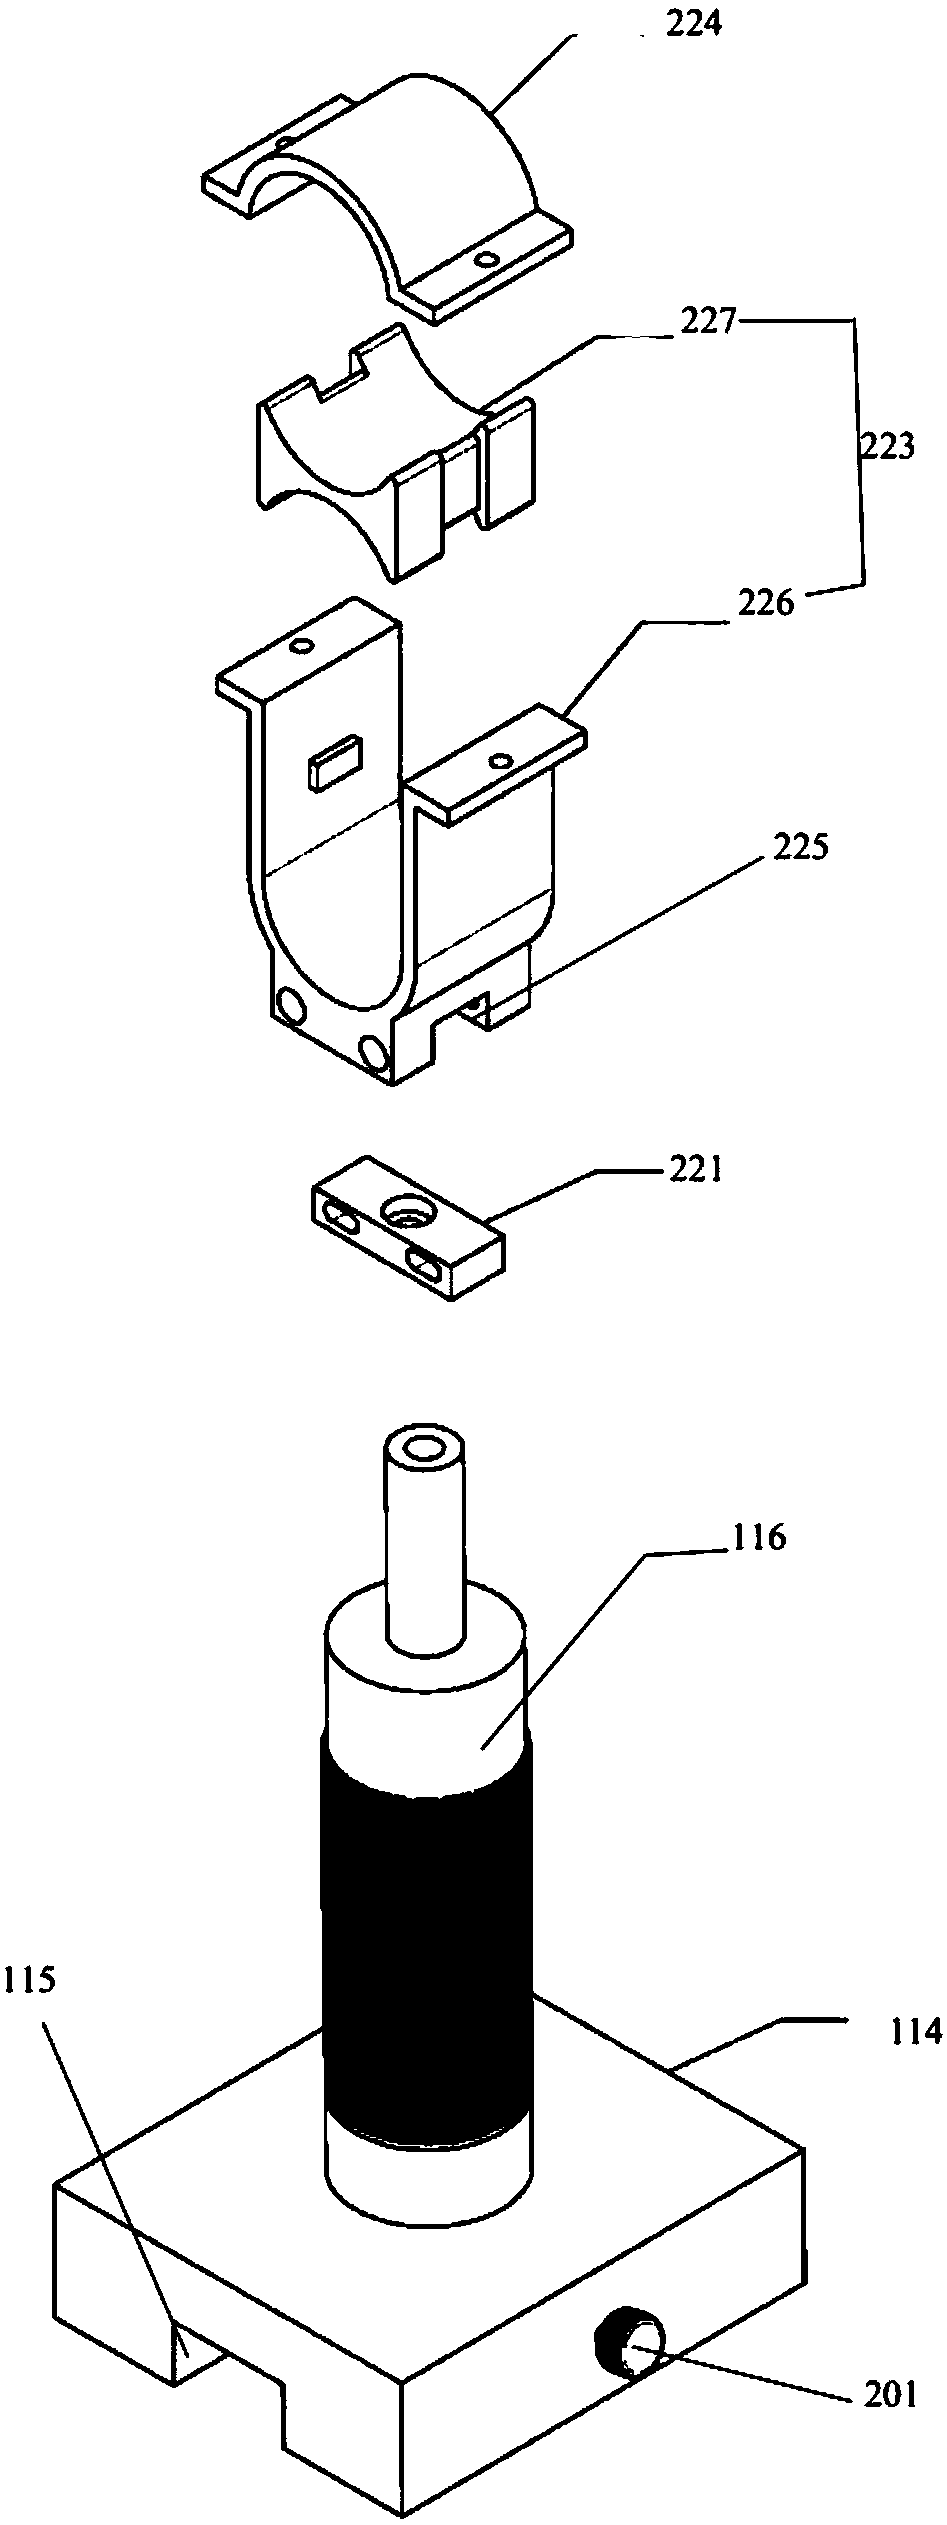 Reluctance-type tension-compression double-layer minisize Hopkinson bar system